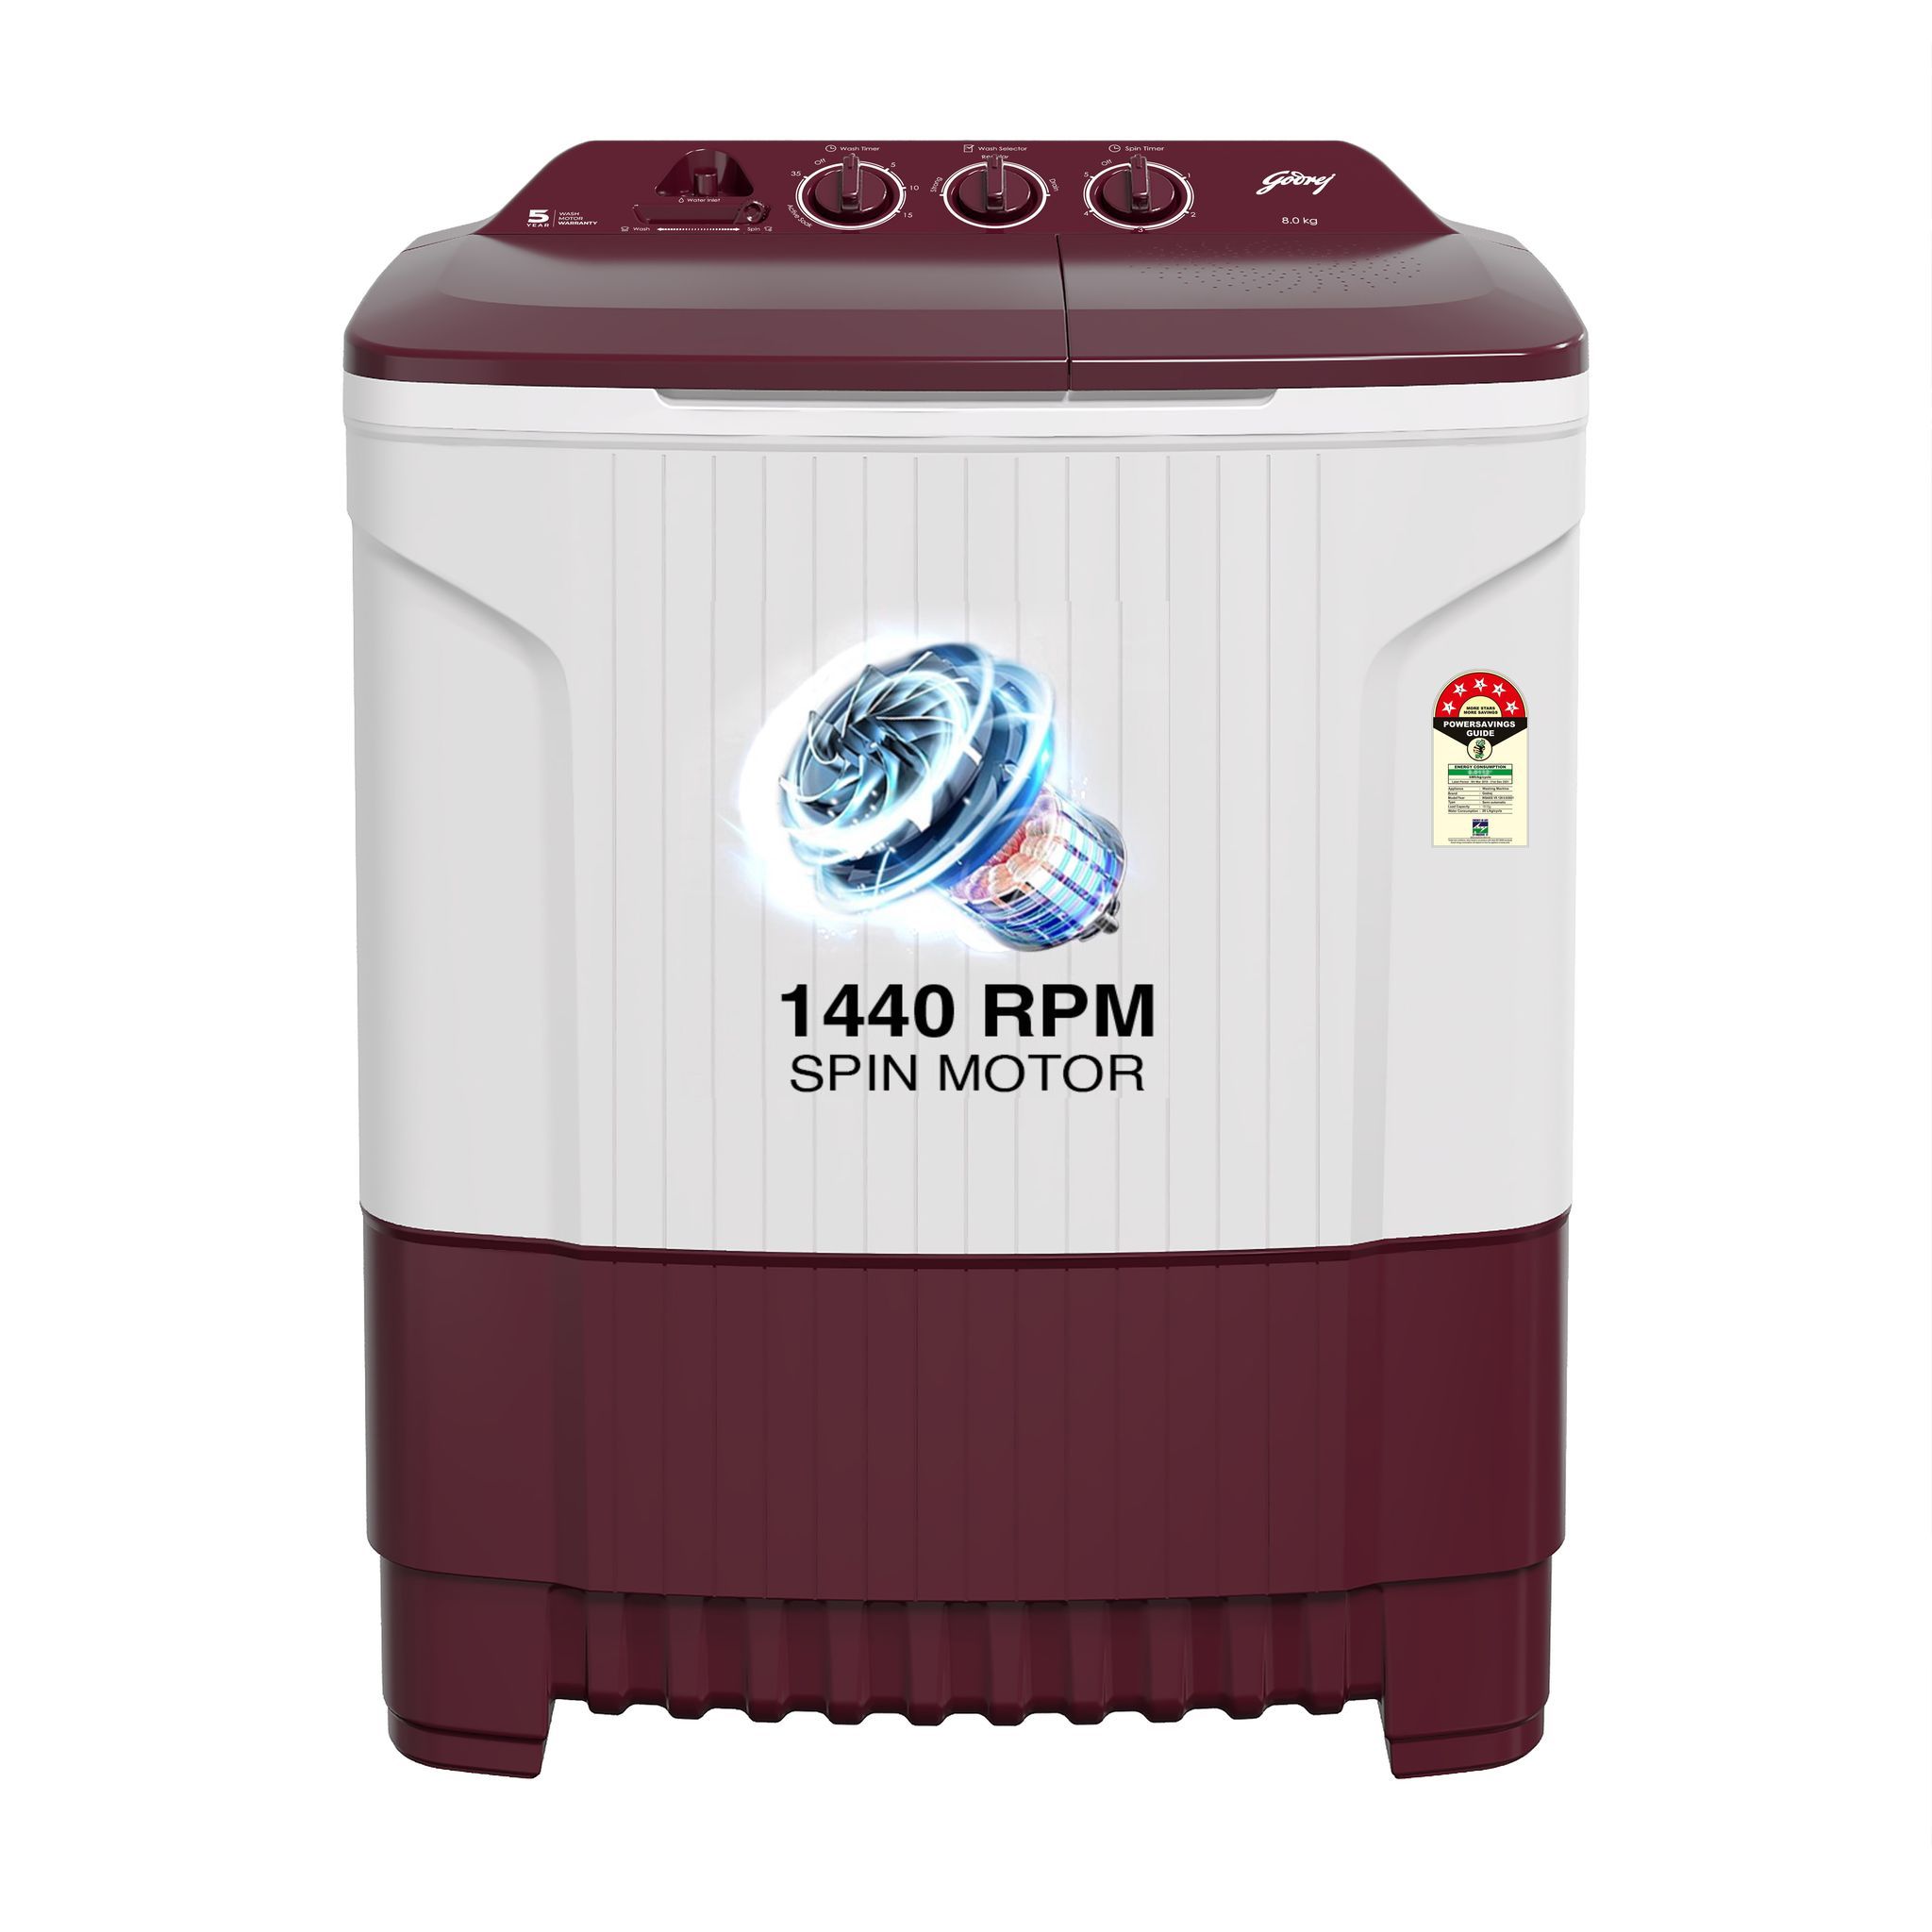 Godrej 8 Kg 5 Star Active Soak Technology Semi-Automatic Top Load Washing Machine (WSEDGE CLS 80 5.0 PN2 M WNRD, Wine Red, Wash Upto 8 King Size Bedsheets)